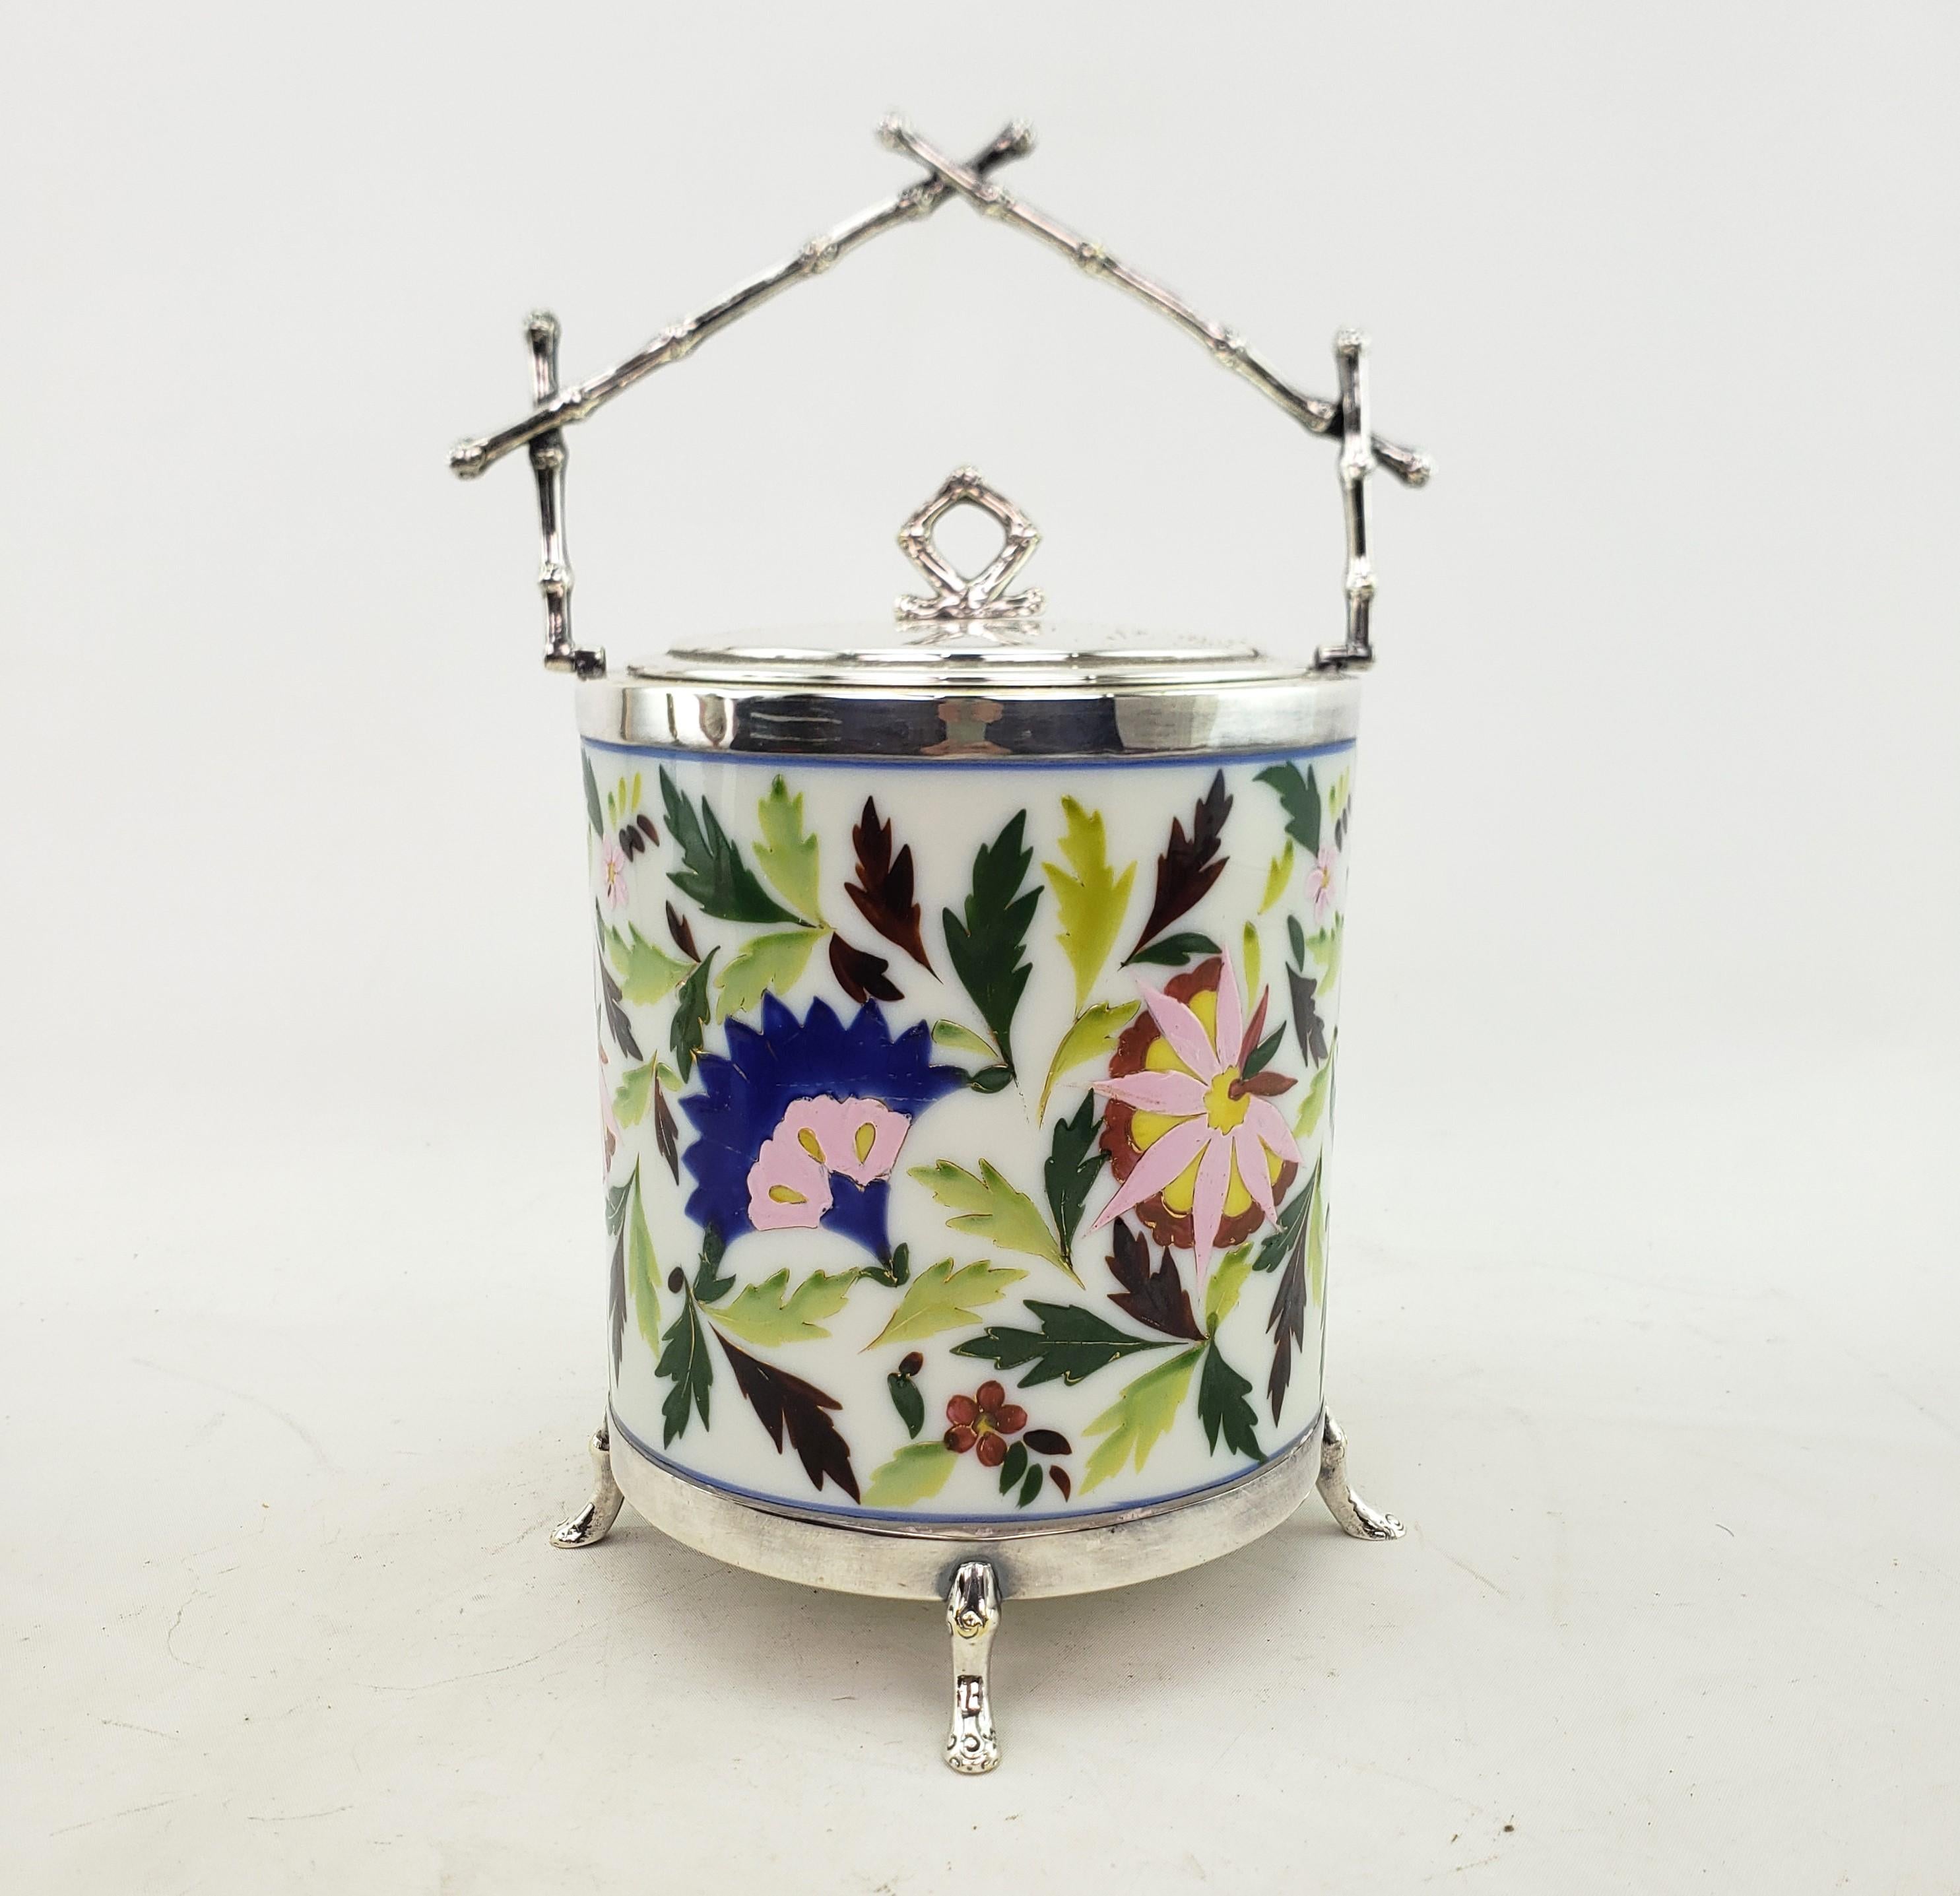 This antique biscuit barrel is unsigned, but presumed to have originated from England and date to approximately 1920 and done in the Art Deco style. The biscuit barrel is composed of a ceramic cylindrical with hand-painted floral decoration and